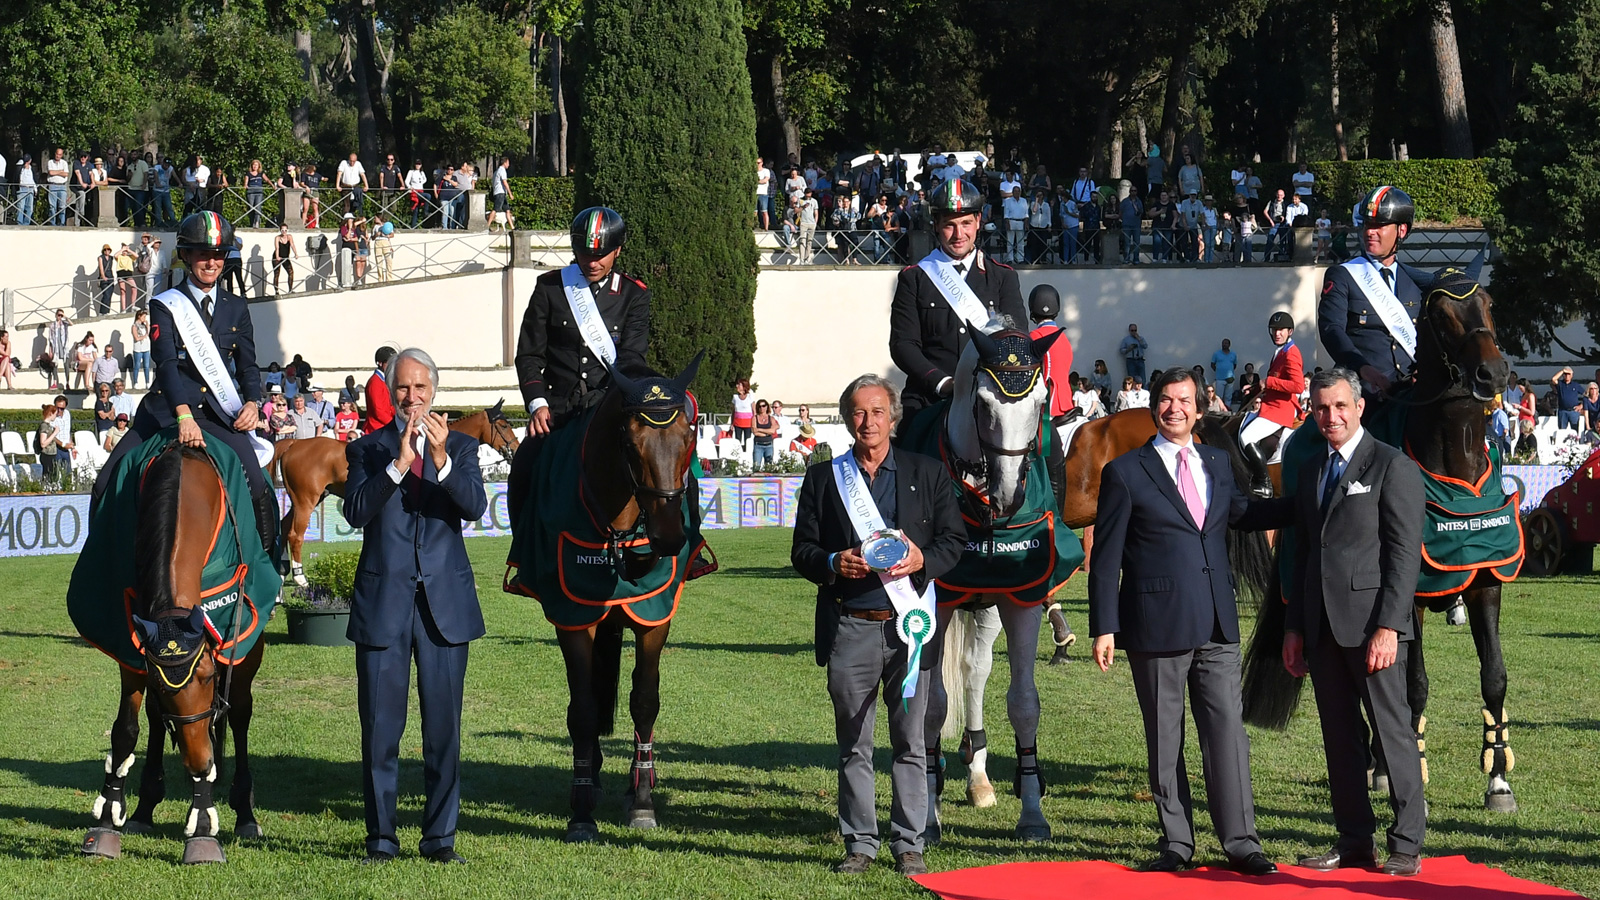 images/news_piazza_siena/2018/Prize-Giving_Nations-Cup_PhSimoneFerraro-CONI.jpg